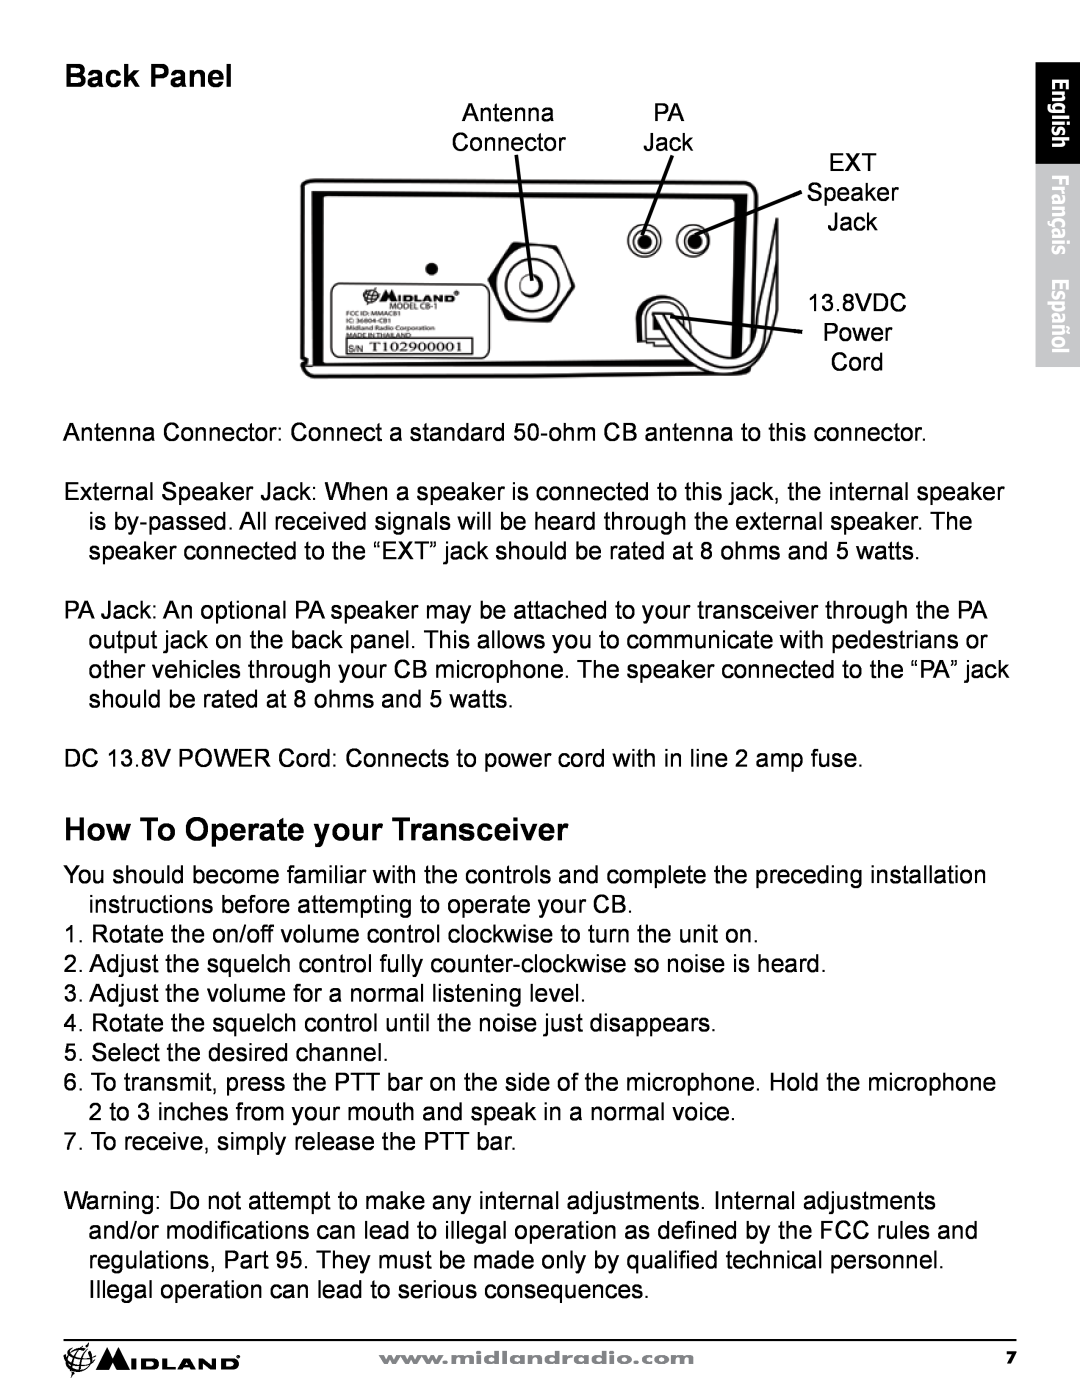 Midland Radio CB-1 owner manual Back Panel, How To Operate your Transceiver 